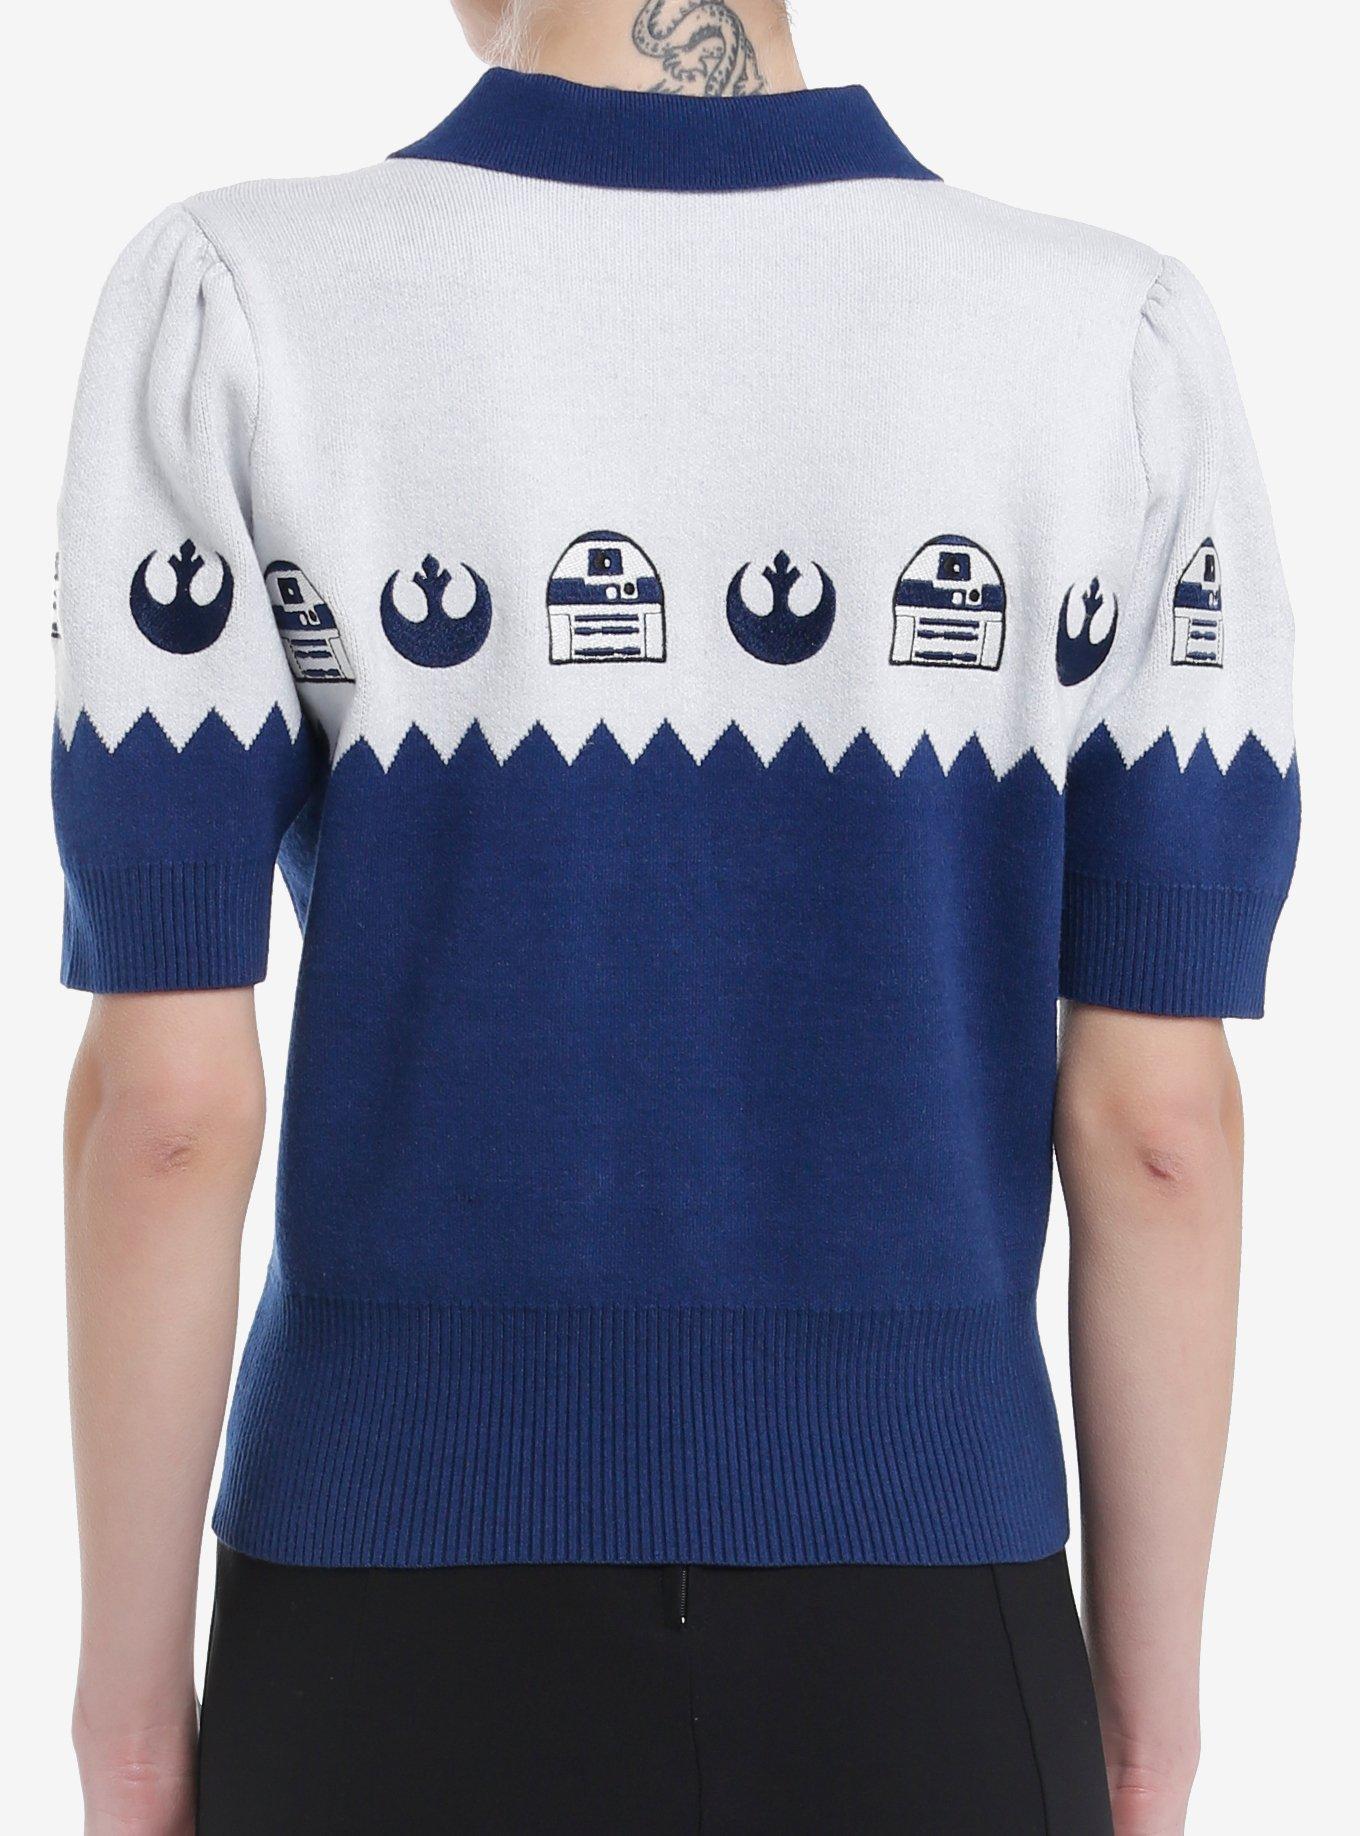 Her Universe Star Wars Rebel Droid Sweater Top Her Universe Exclusive, BLUE  WHITE, alternate